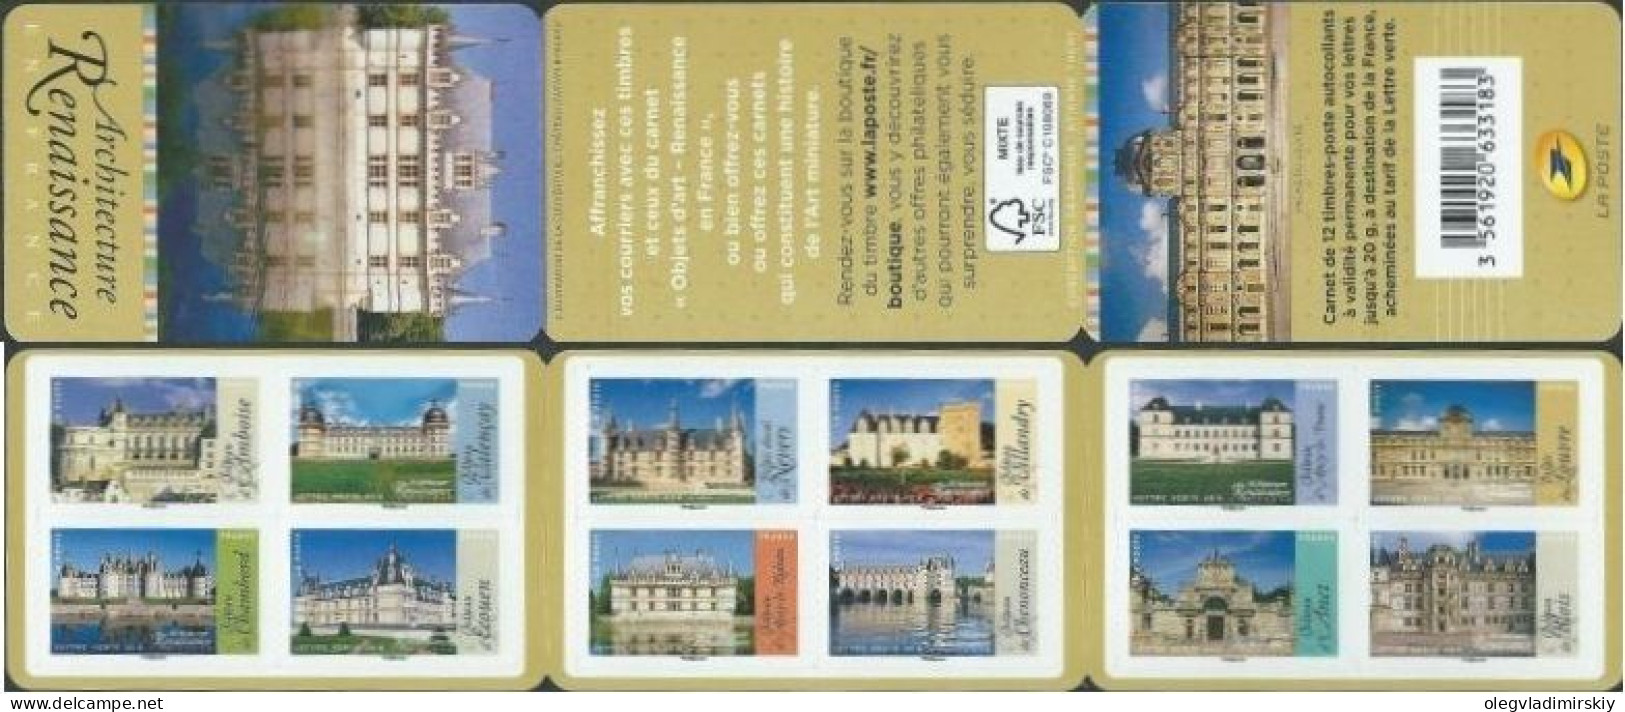 France 2015 Architecture Of Renaissance Castles Palaces Museums Set Of 12 Stamps In Booklet MNH - Castles